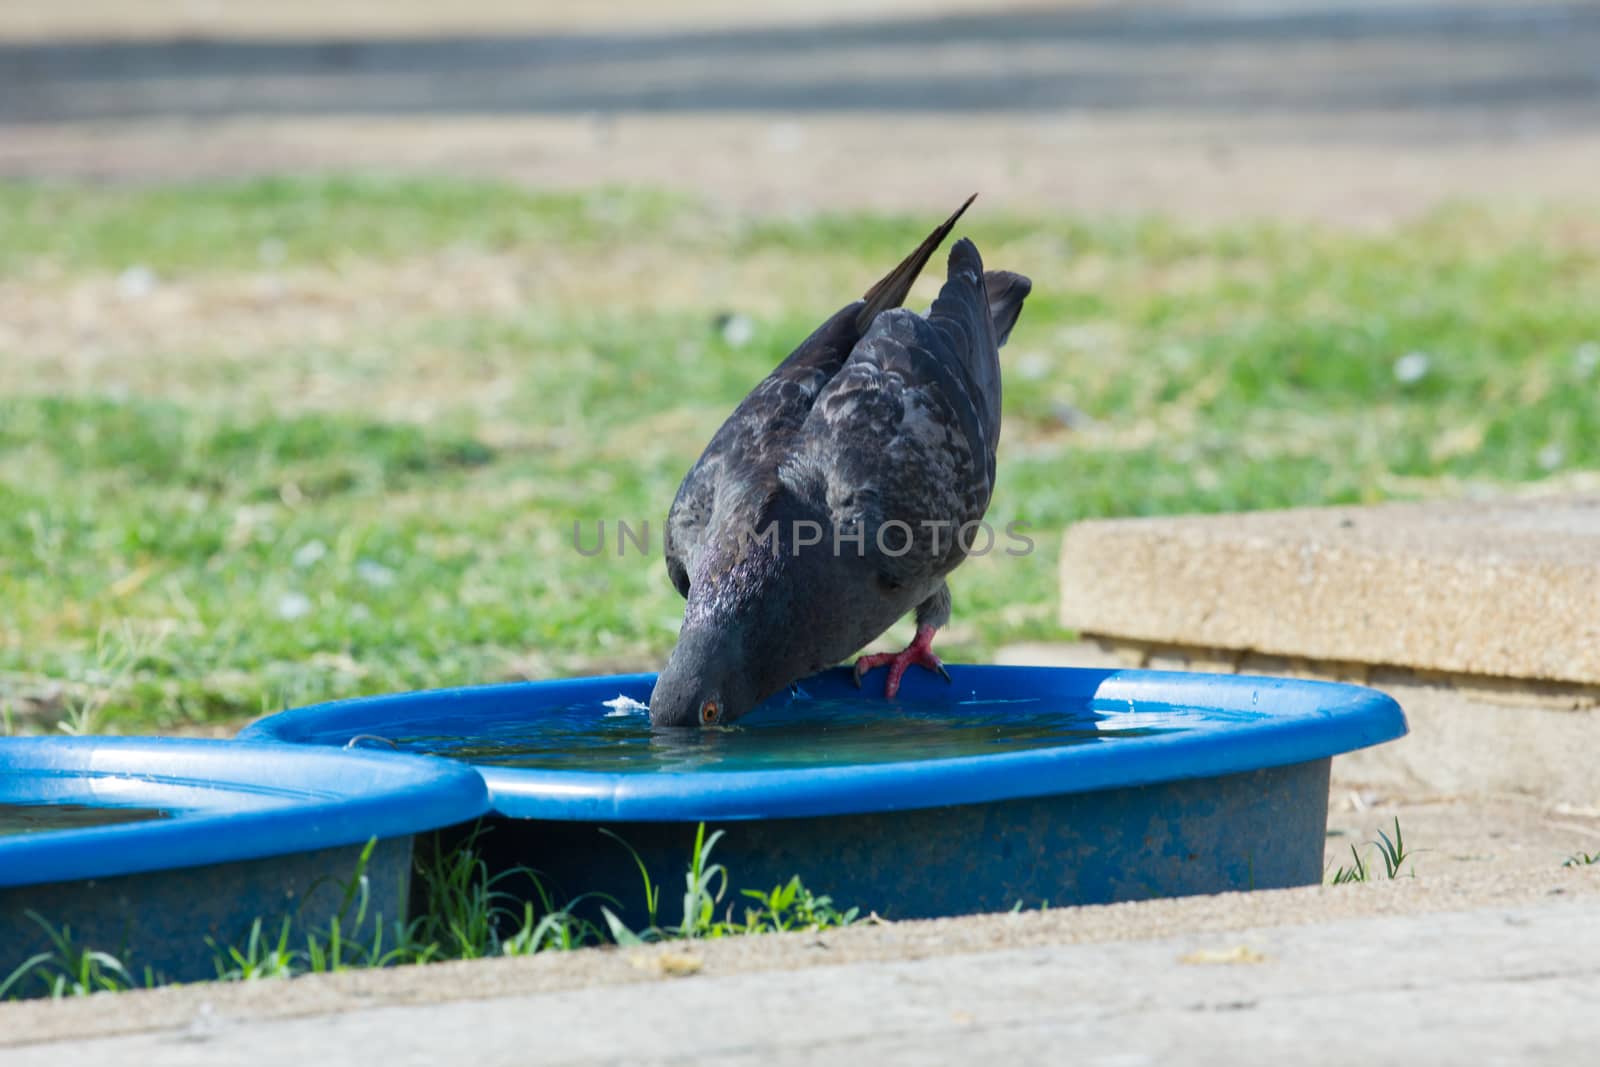 pigeon drinks water in a blue bowl in summer in Thailand by a3701027